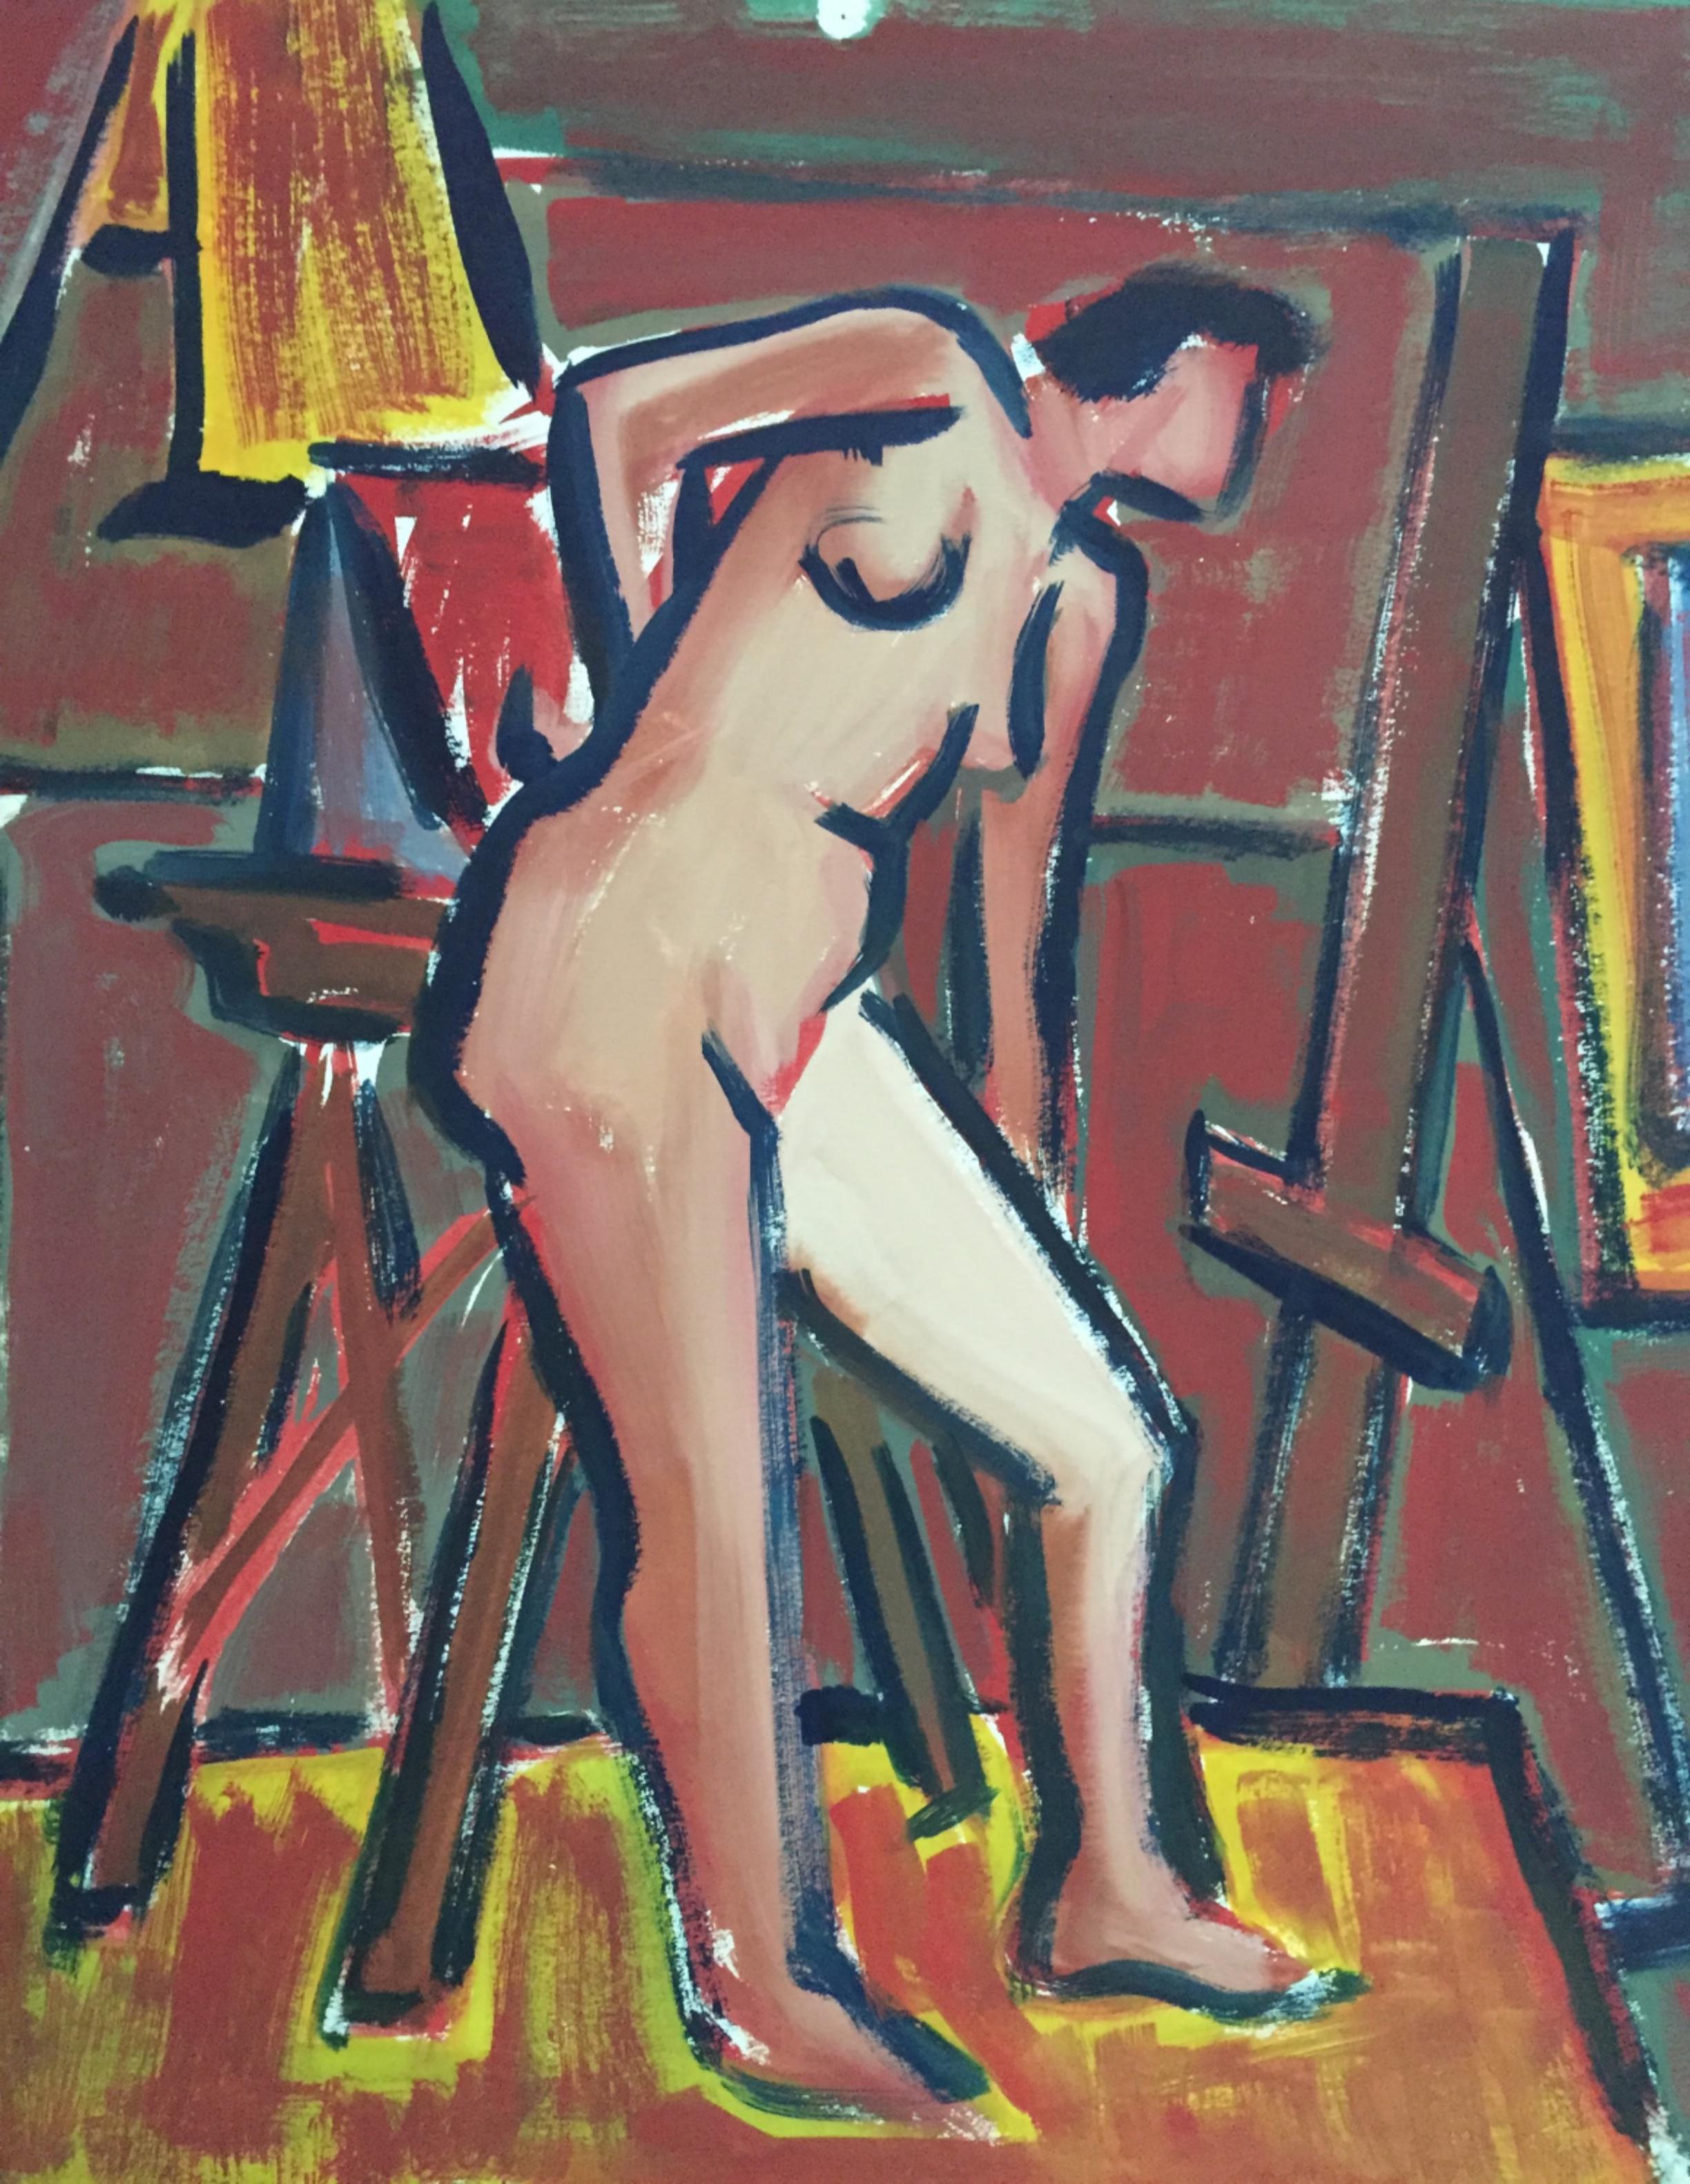 From the estate of Jerry Opper & Ruth Friedman Opper
Bent
c. 1940-1950's
Gouache on Paper
15